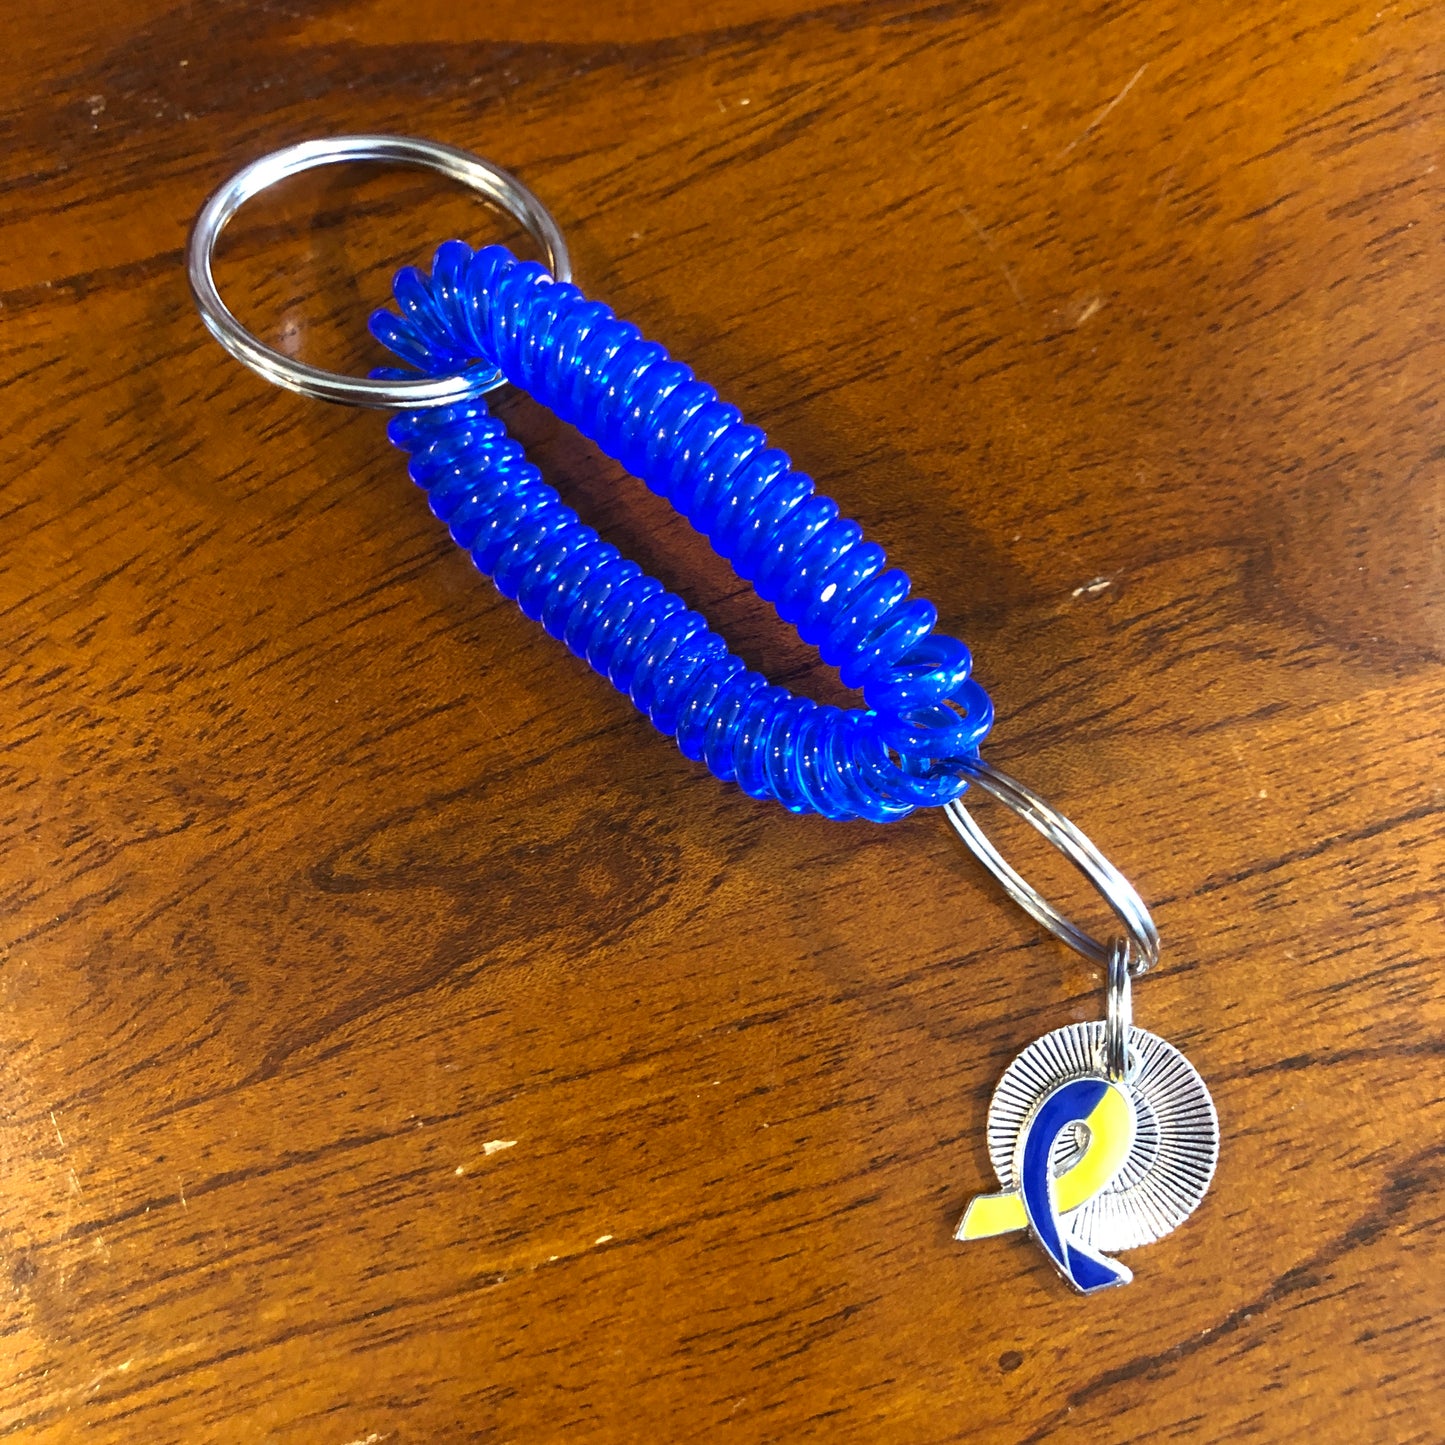 Down Syndrome Awareness Key Ring